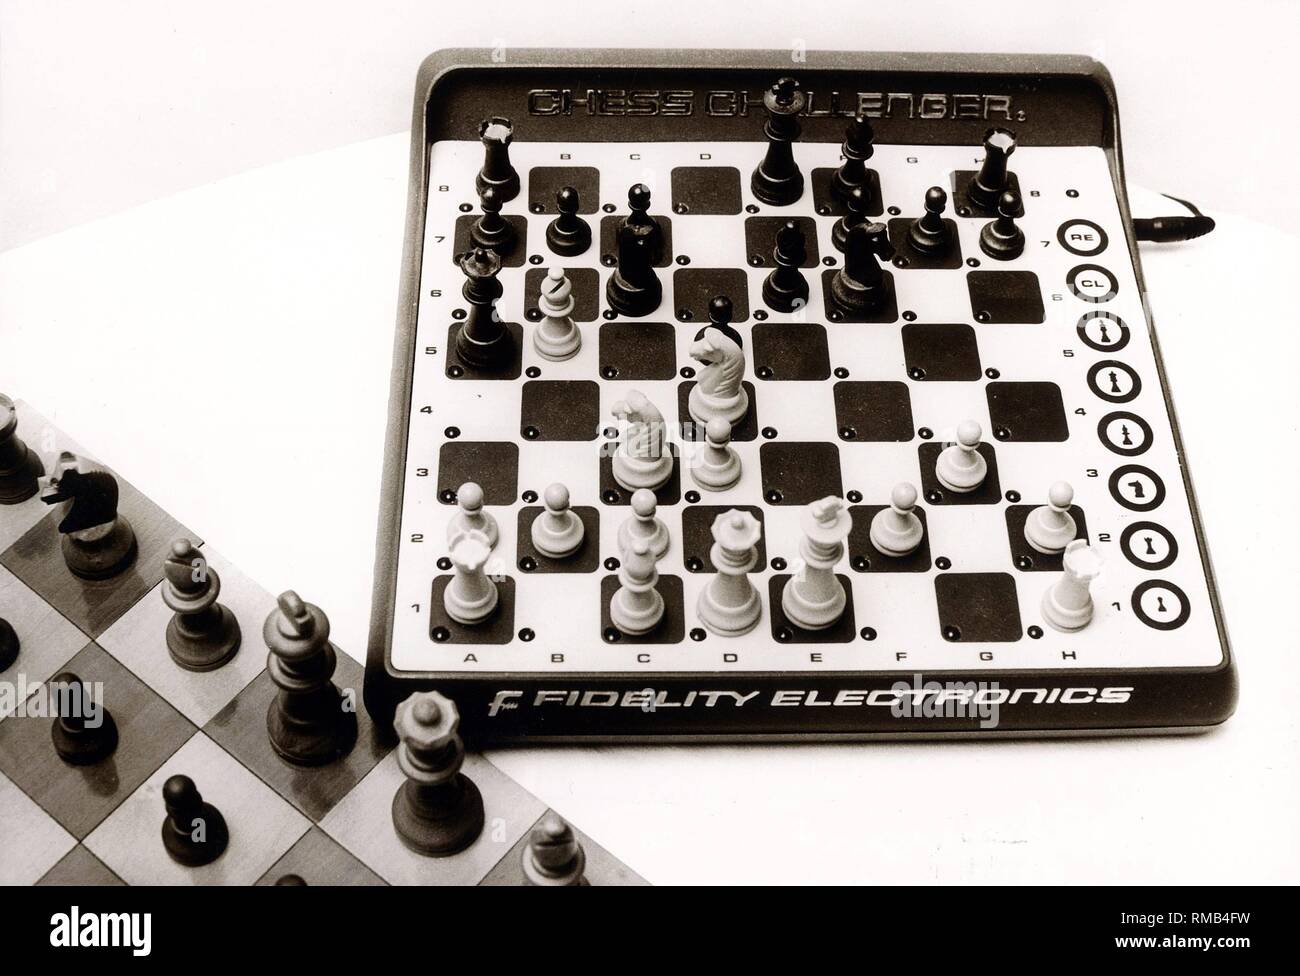 Chess game with the computer 'Chess Challenger', 1981. Stock Photo